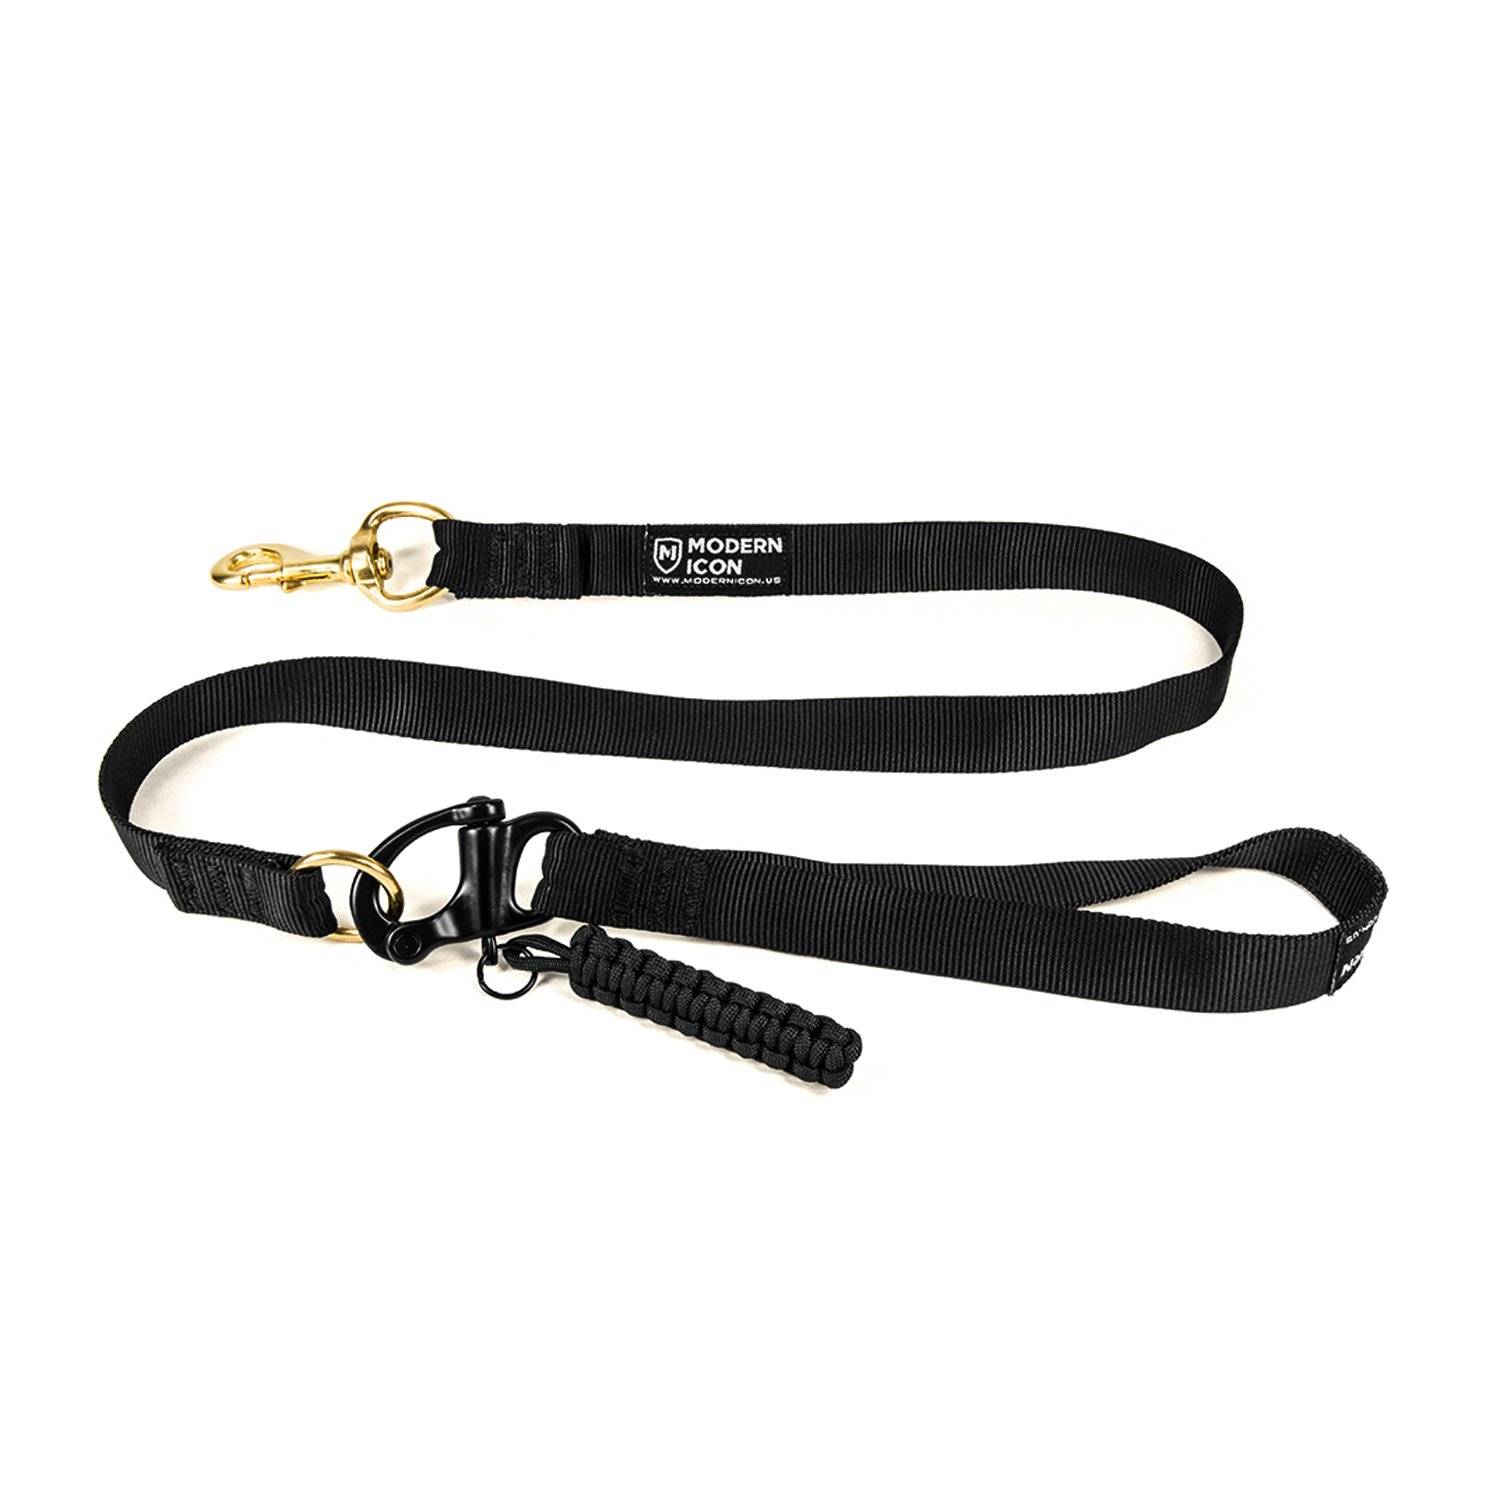 Modern Icon K9 Tactical Deployment Lead